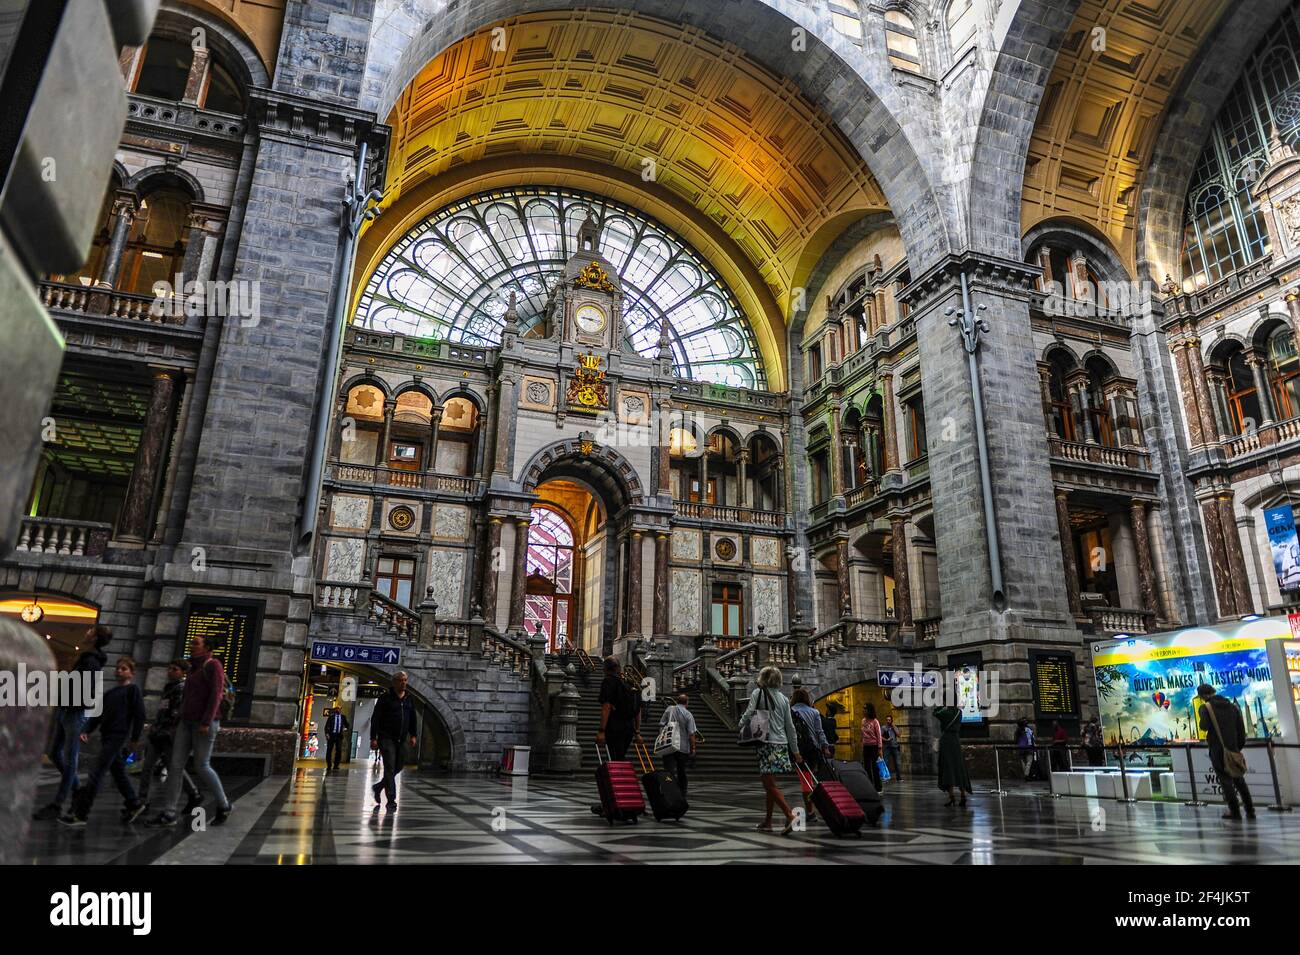 Antwerp, Belgium - July 12, 2019: Commuters passing through the Antwerp central train station in Belgium Stock Photo